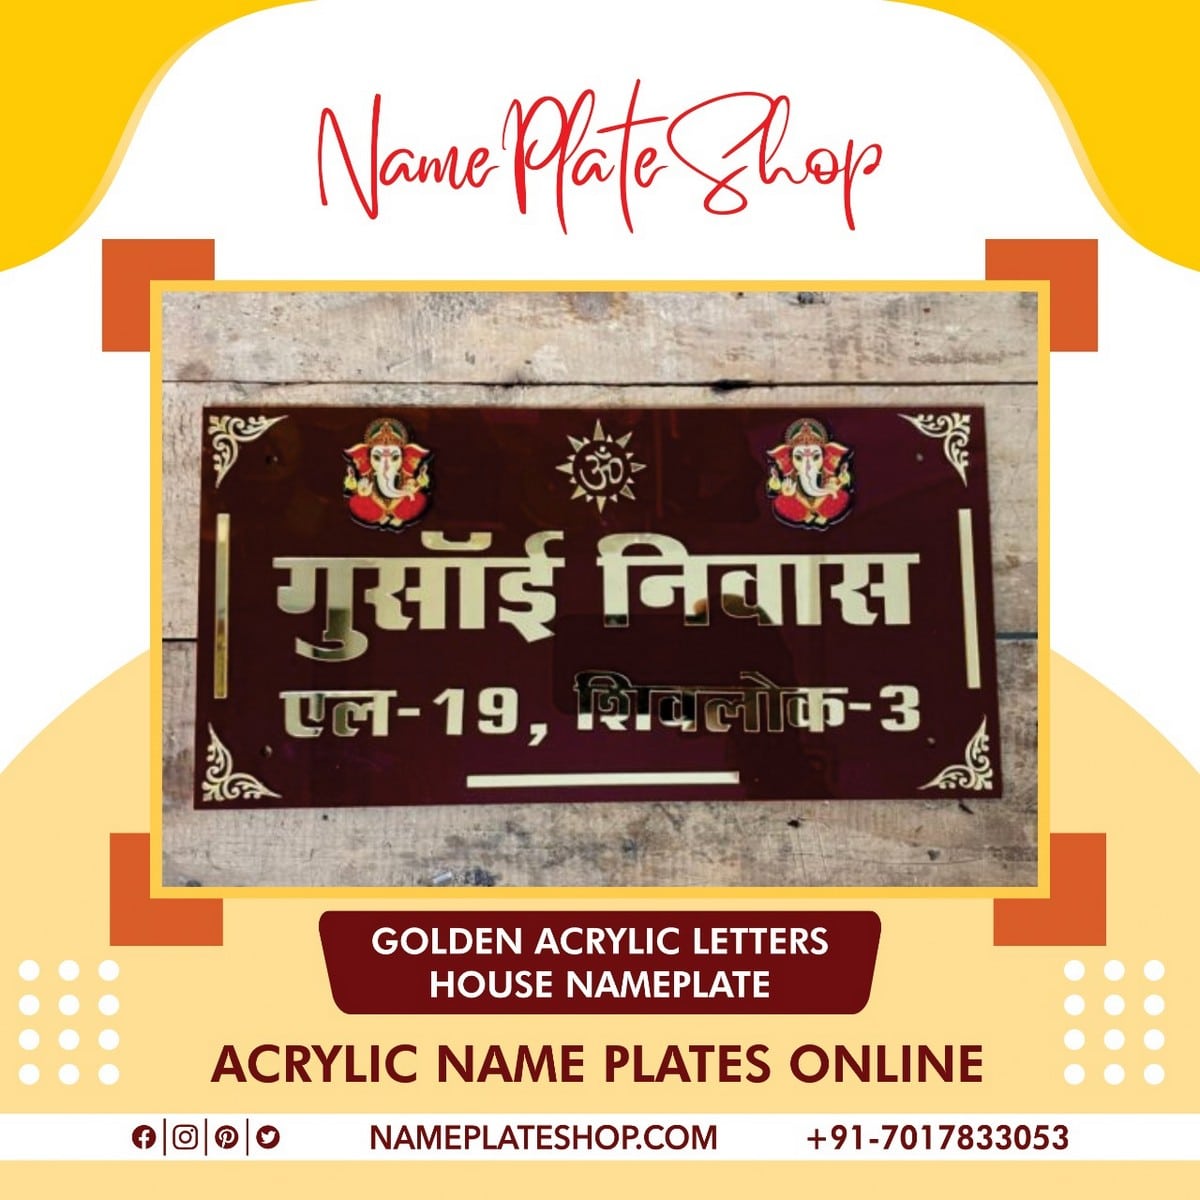 Best Site Option For Acrylic Name Plates Online